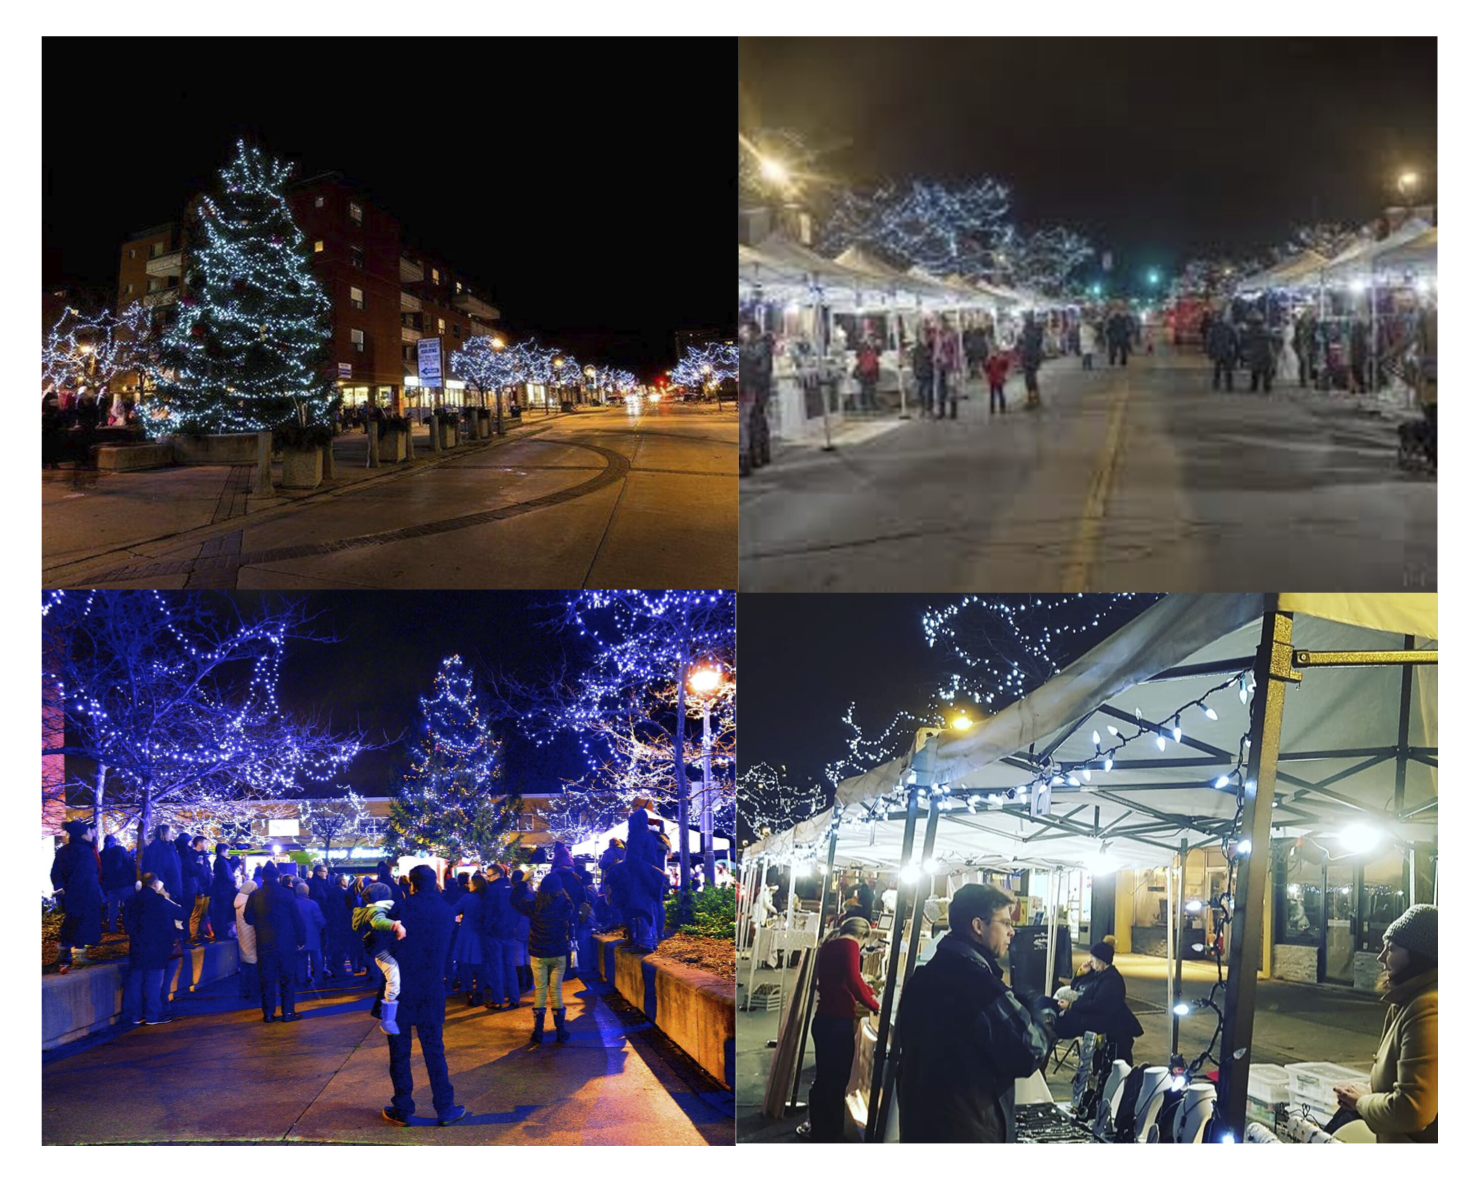 Volunteers needed for the Kerr Village 25th Annual Holiday Market & Christmas Tree Lighting